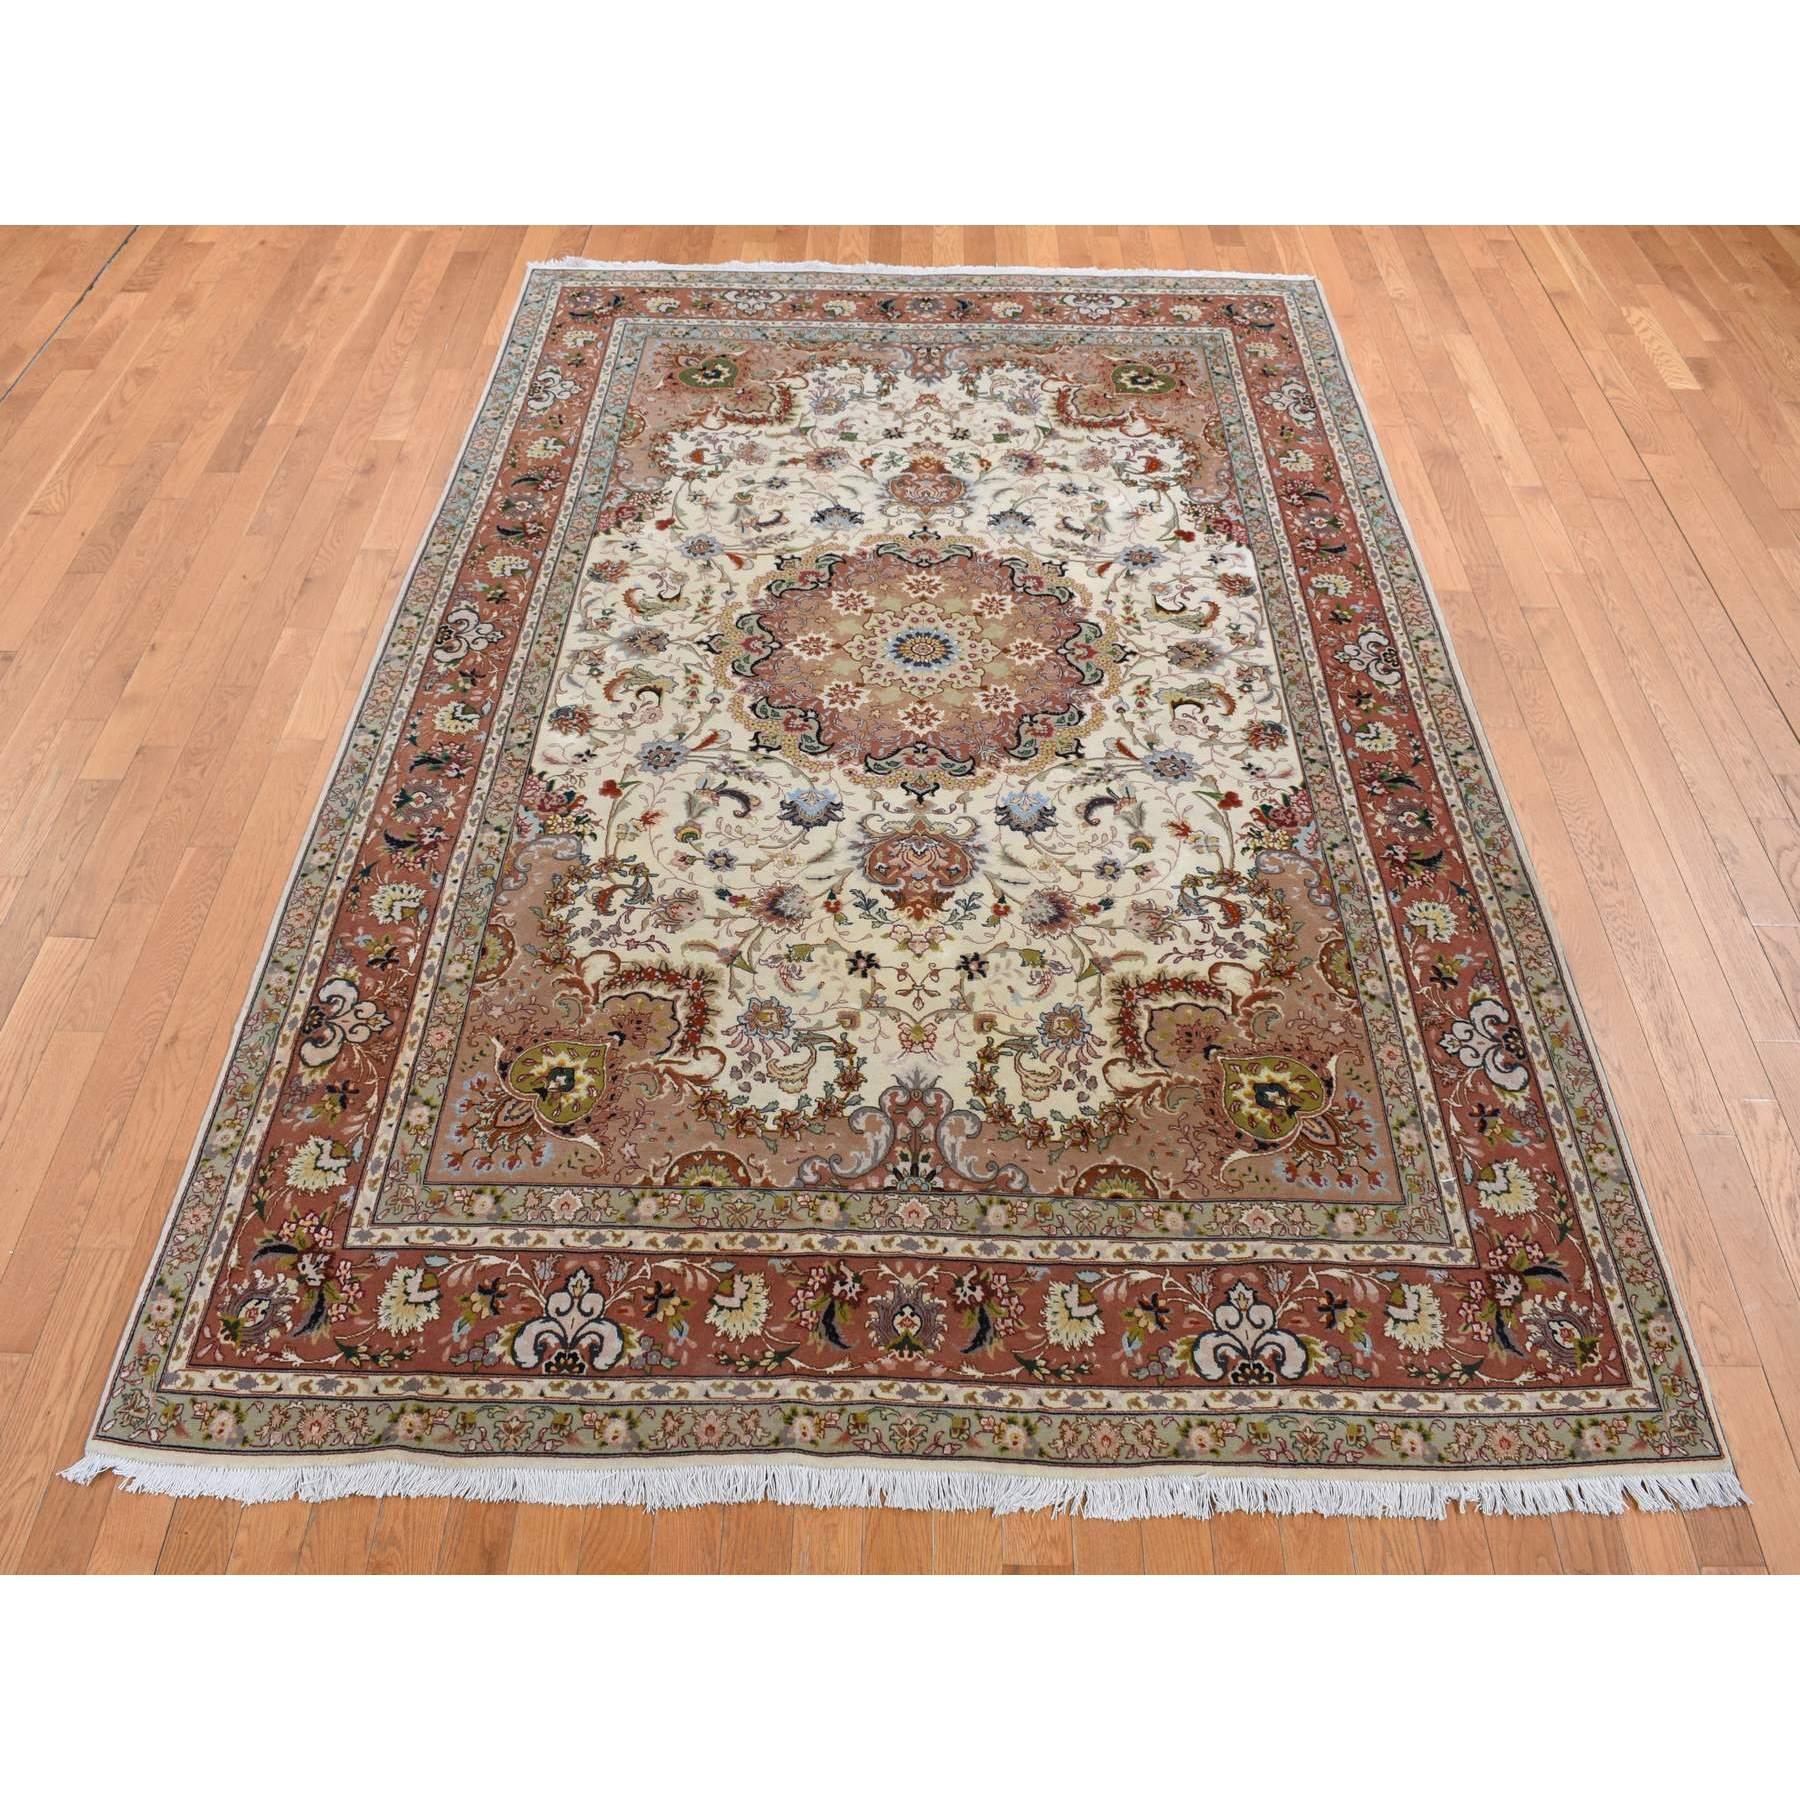 This fabulous Hand-Knotted carpet has been created and designed for extra strength and durability. This rug has been handcrafted for weeks in the traditional method that is used to make
Exact Rug Size in Feet and Inches : 6'9